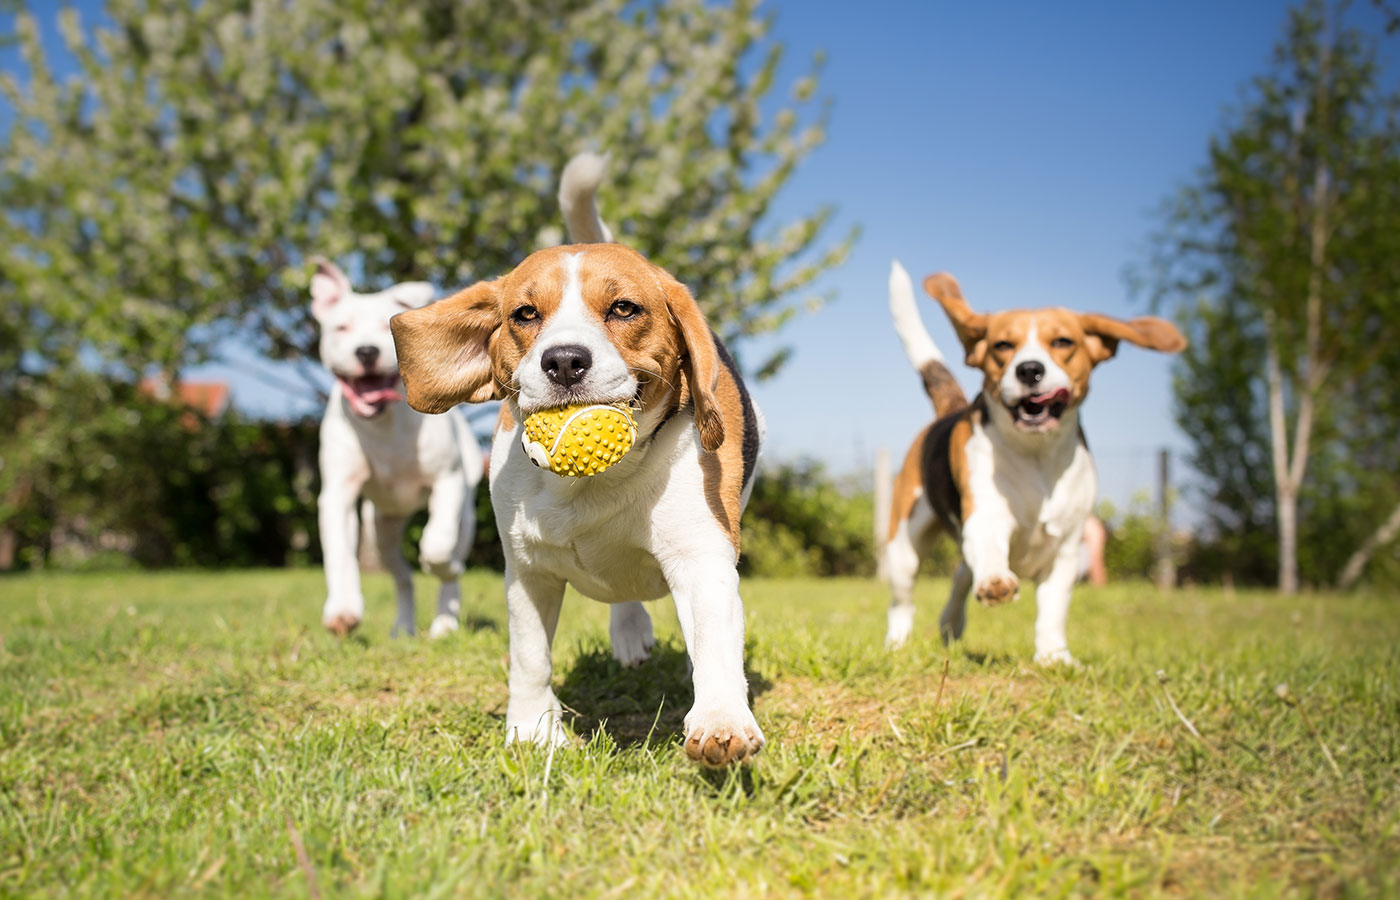 Group of dogs playing in the park - Image